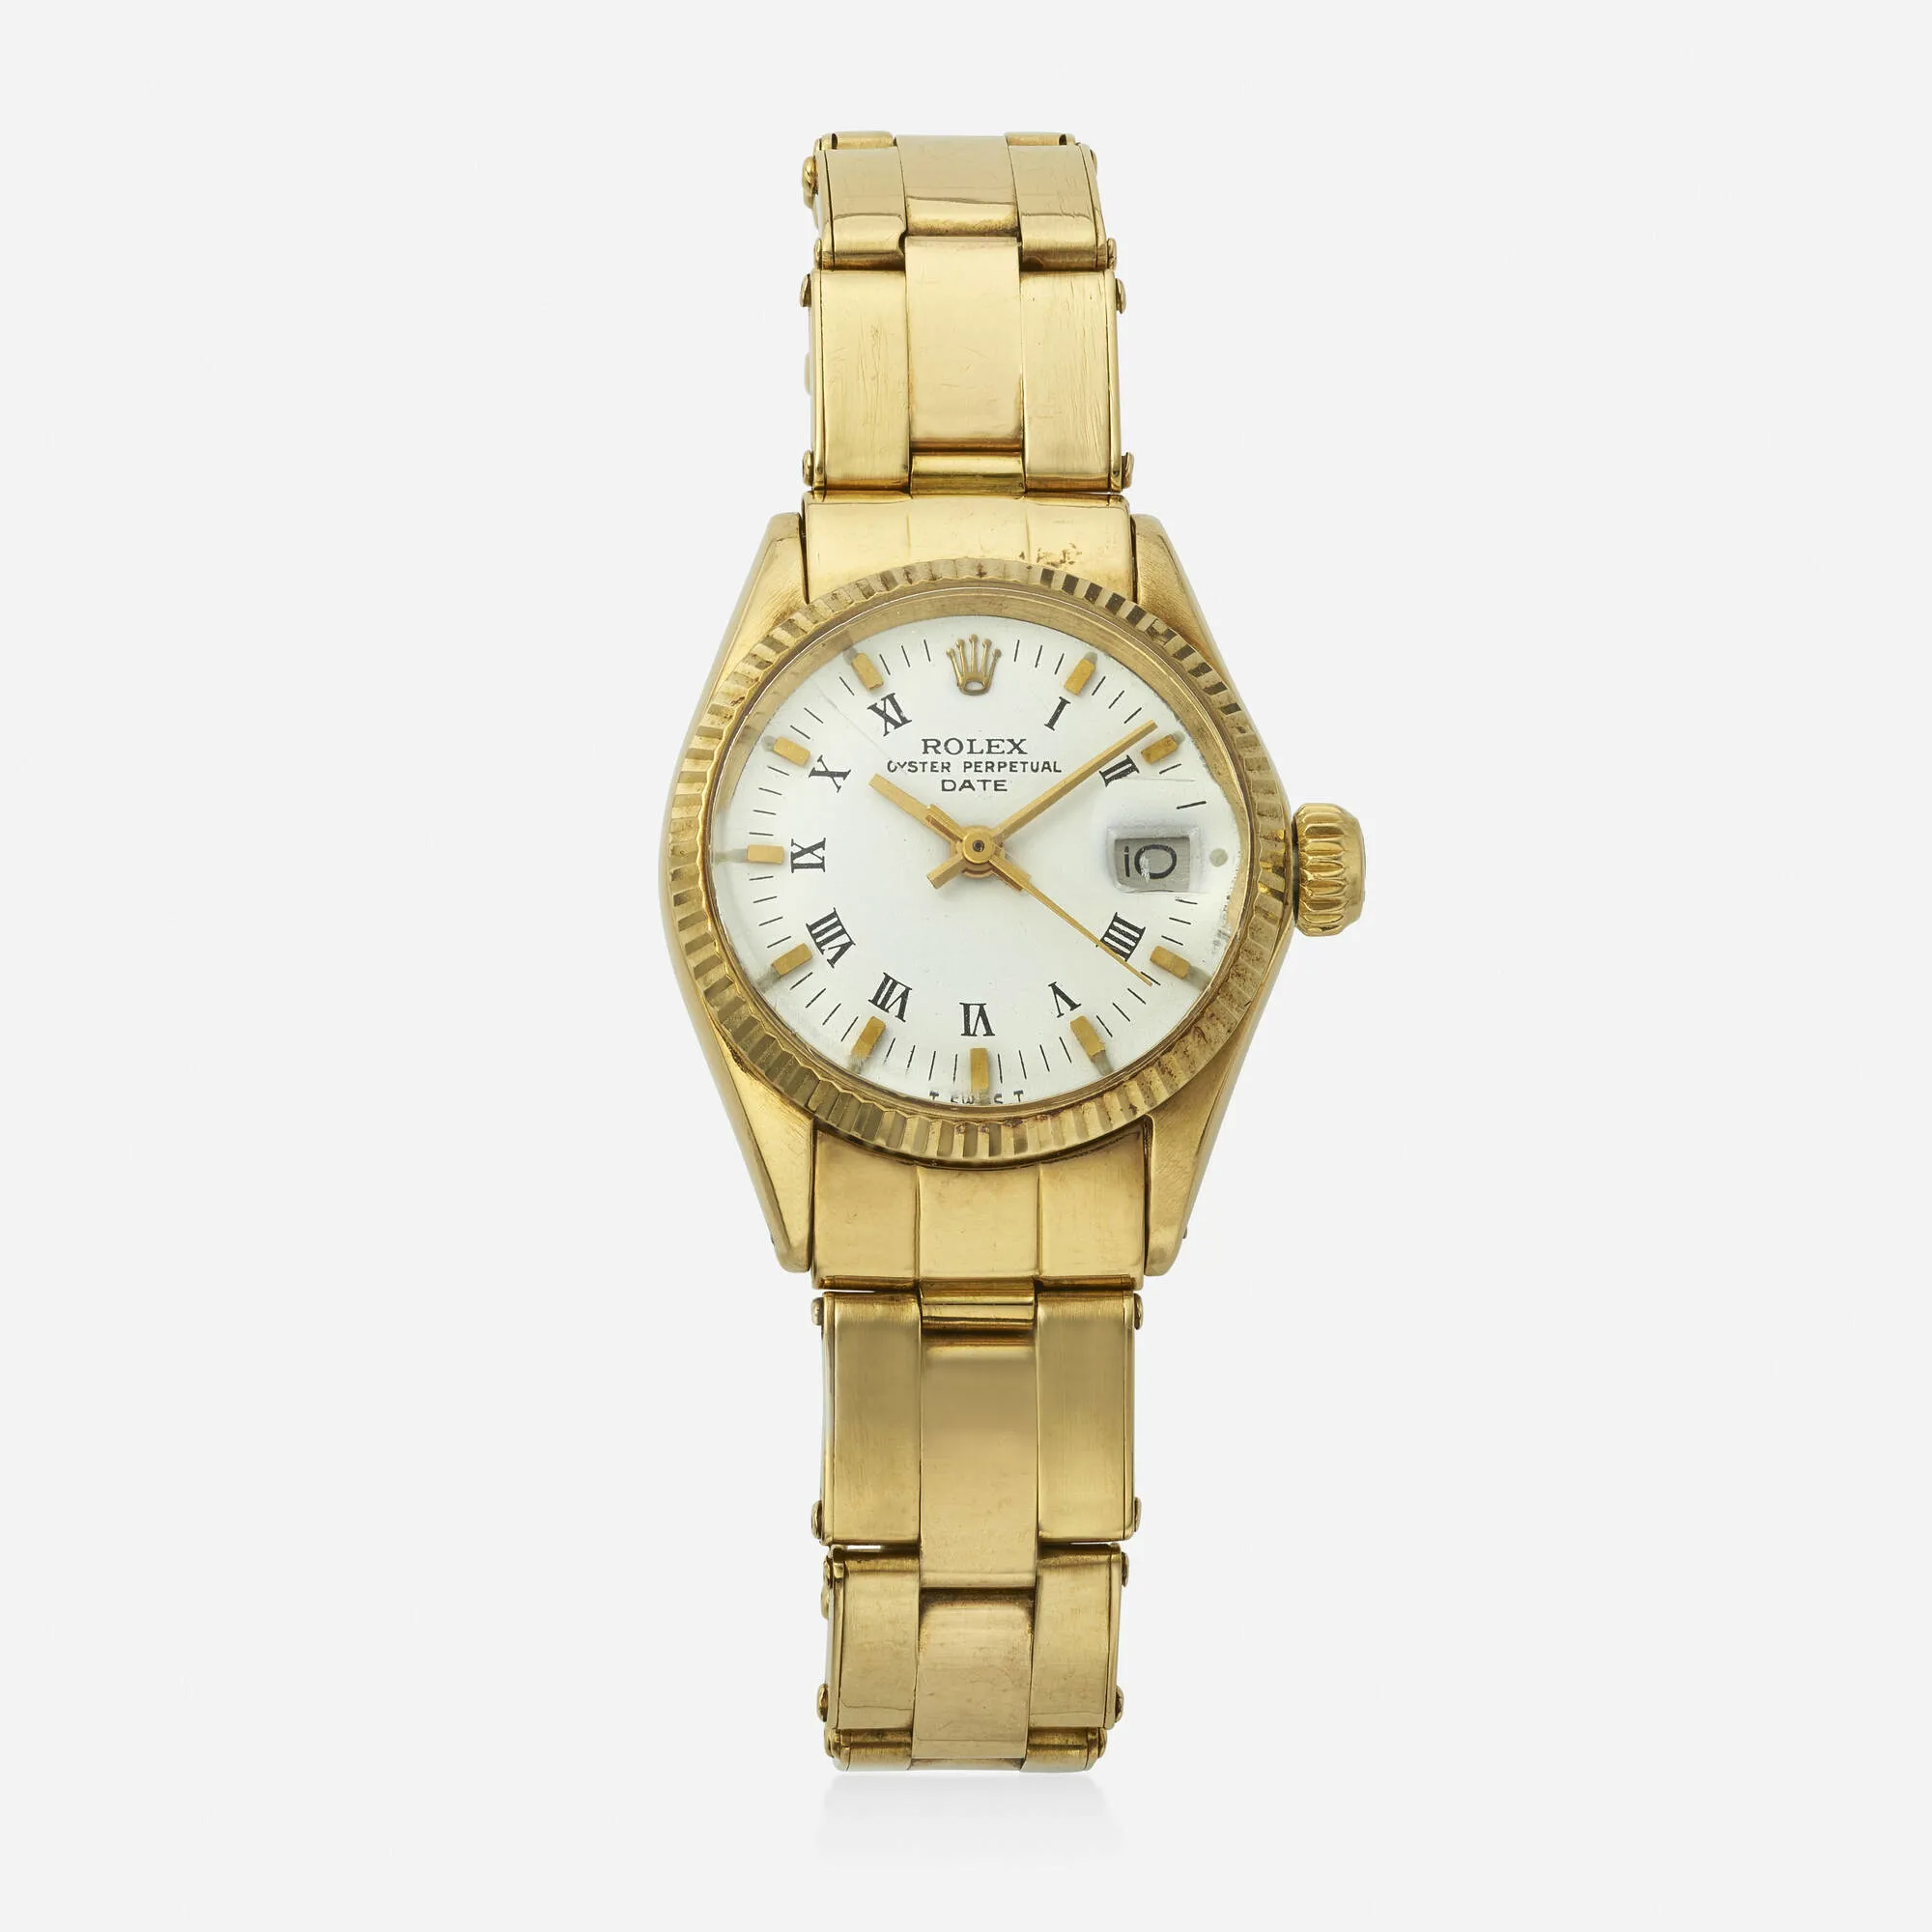 Rolex Oyster Perpetual Date 6517 26mm Yellow gold White